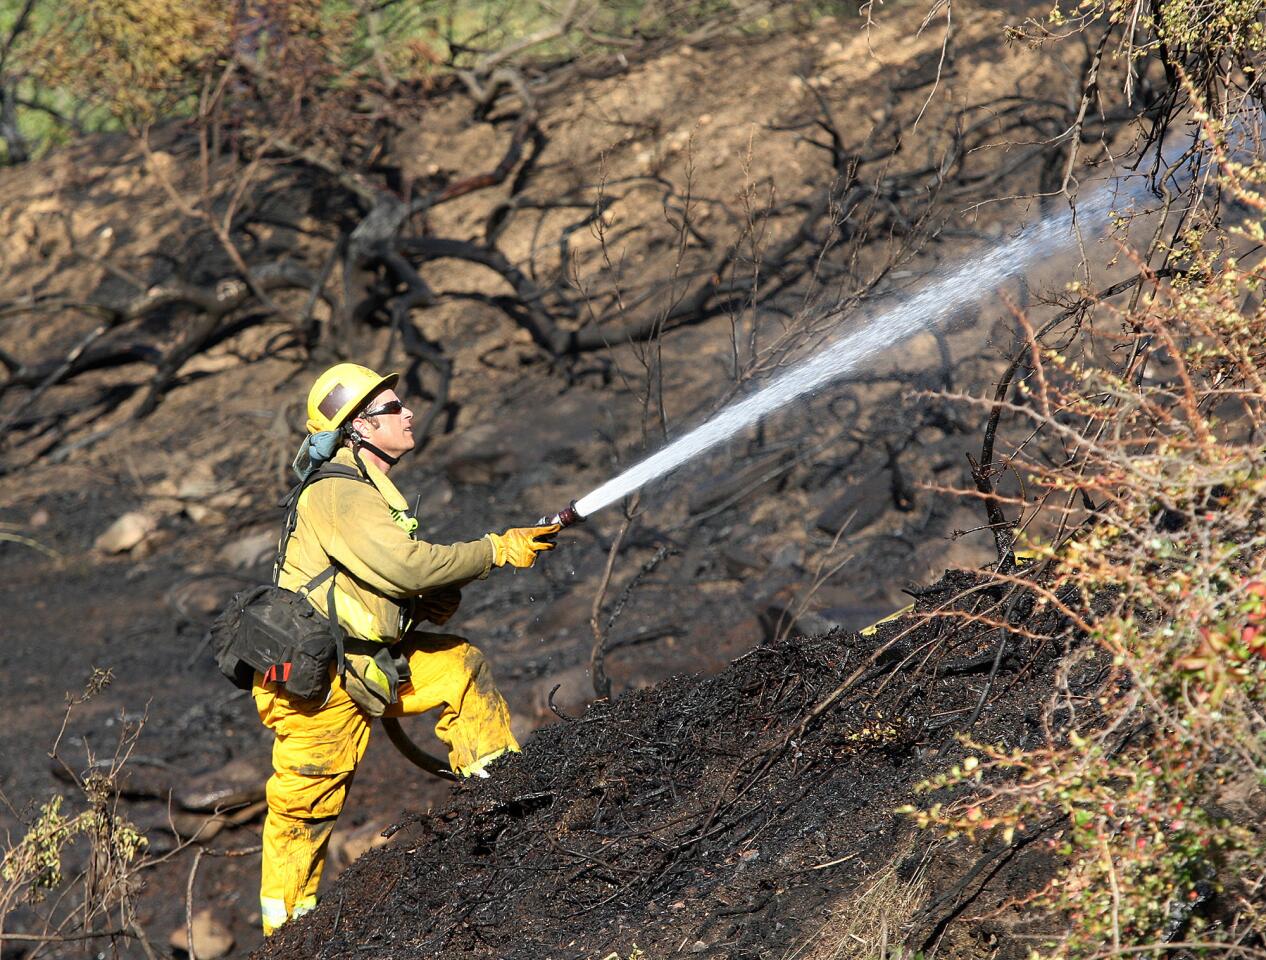 A firefighter shoots a steady steam of water onto hotspots during the mop up of a 2-acre brush fire, brought under control by fire departments from Glendale, Pasadena and Burbank on Figureroa Street in Glendale on Wednesday, June 4, 2014. The fire was on the Pasadena side of the street, but those on the Glendale side of the street were impressed with the quick response and result.